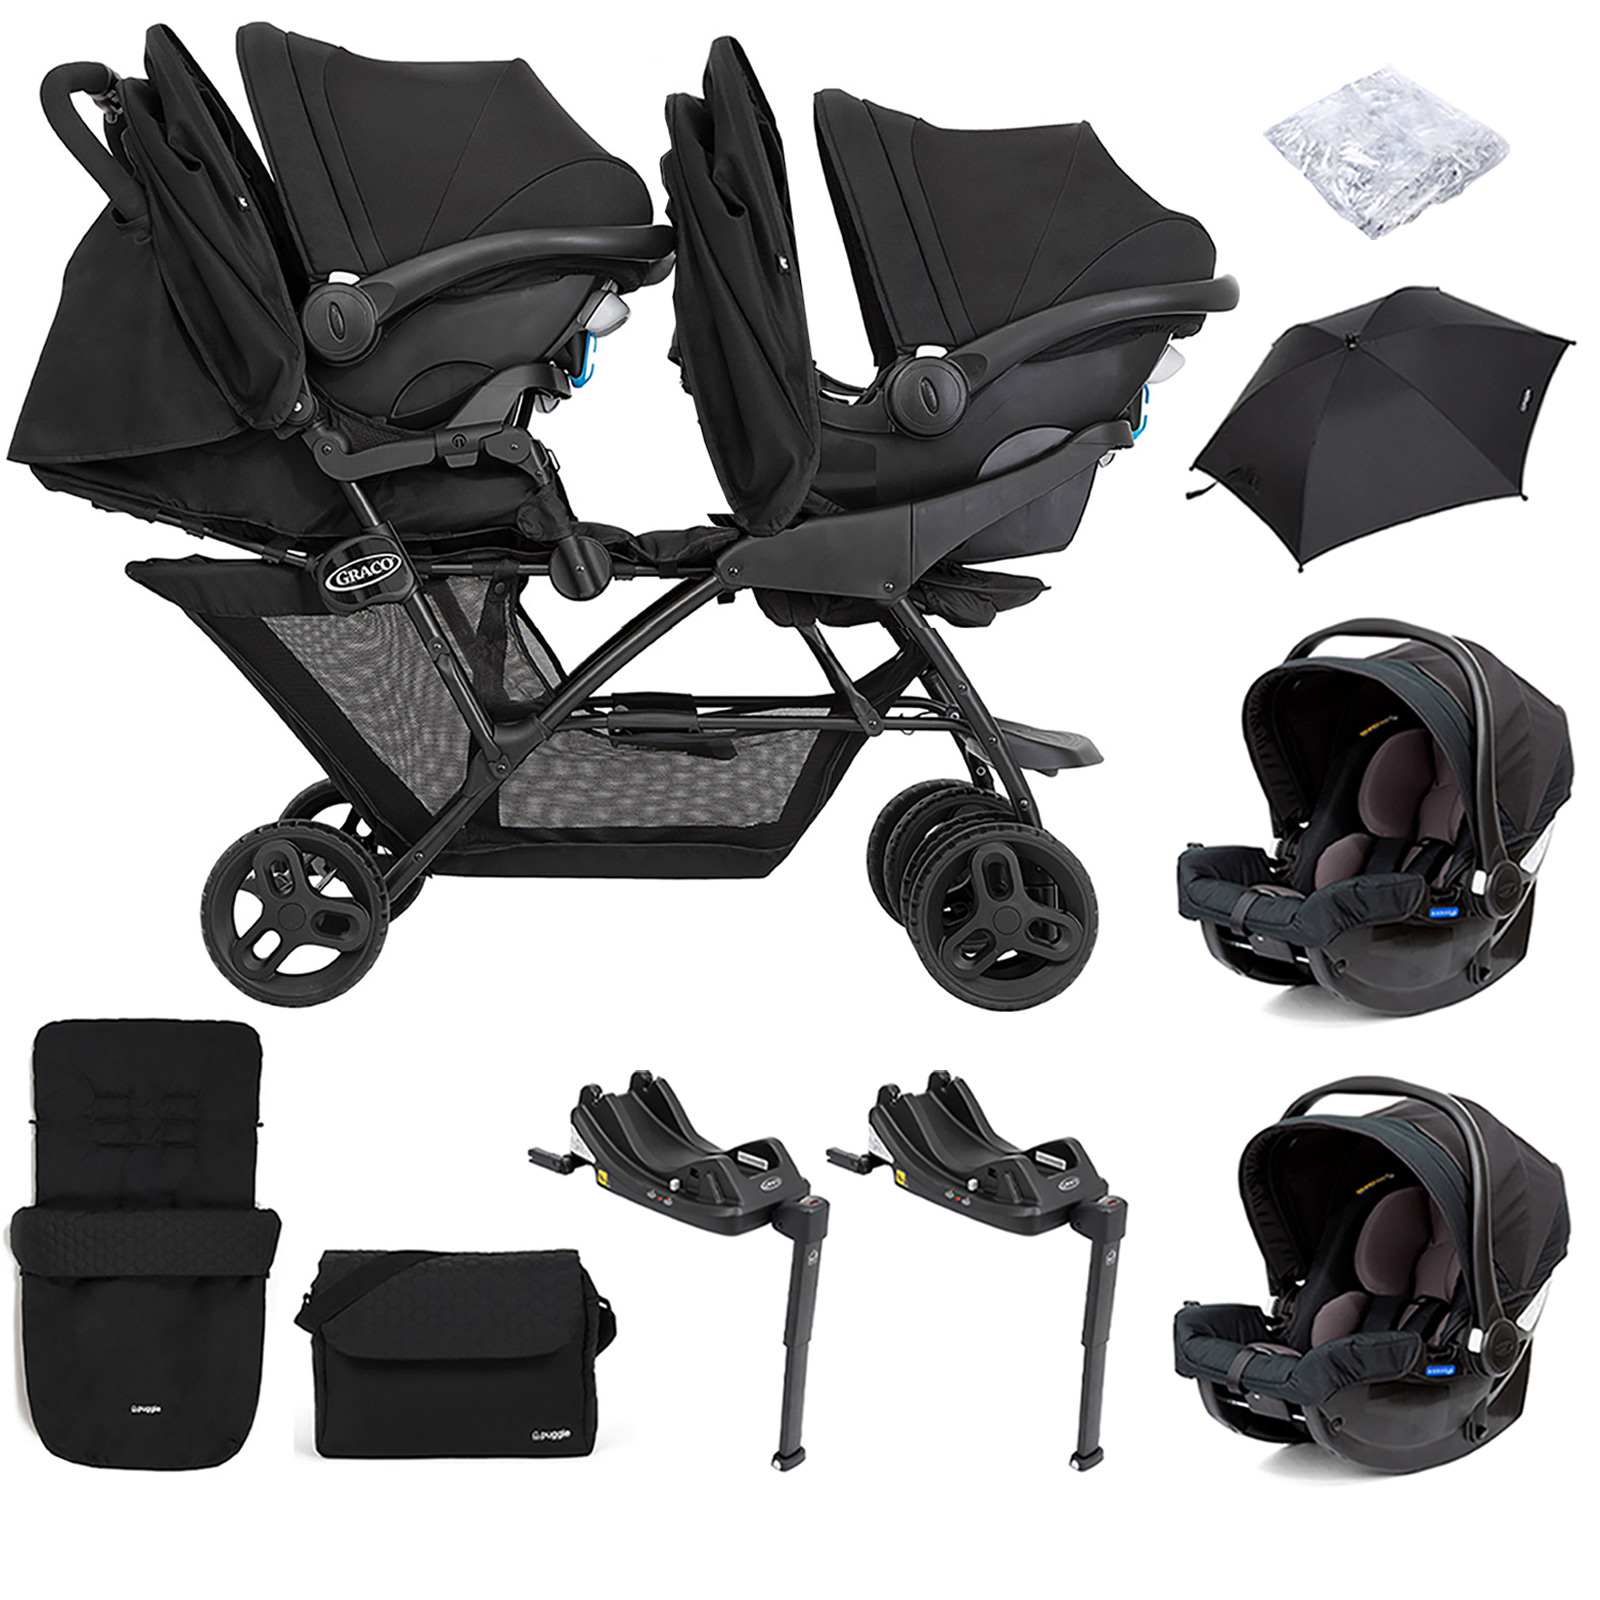 Graco Blaaze™ Stadium Duo Tandem Travel System with Front Apron, Raincover, Footmuff, Changing Bag, 2 Car Seats, 2 Bases & Parasol - Night Sky